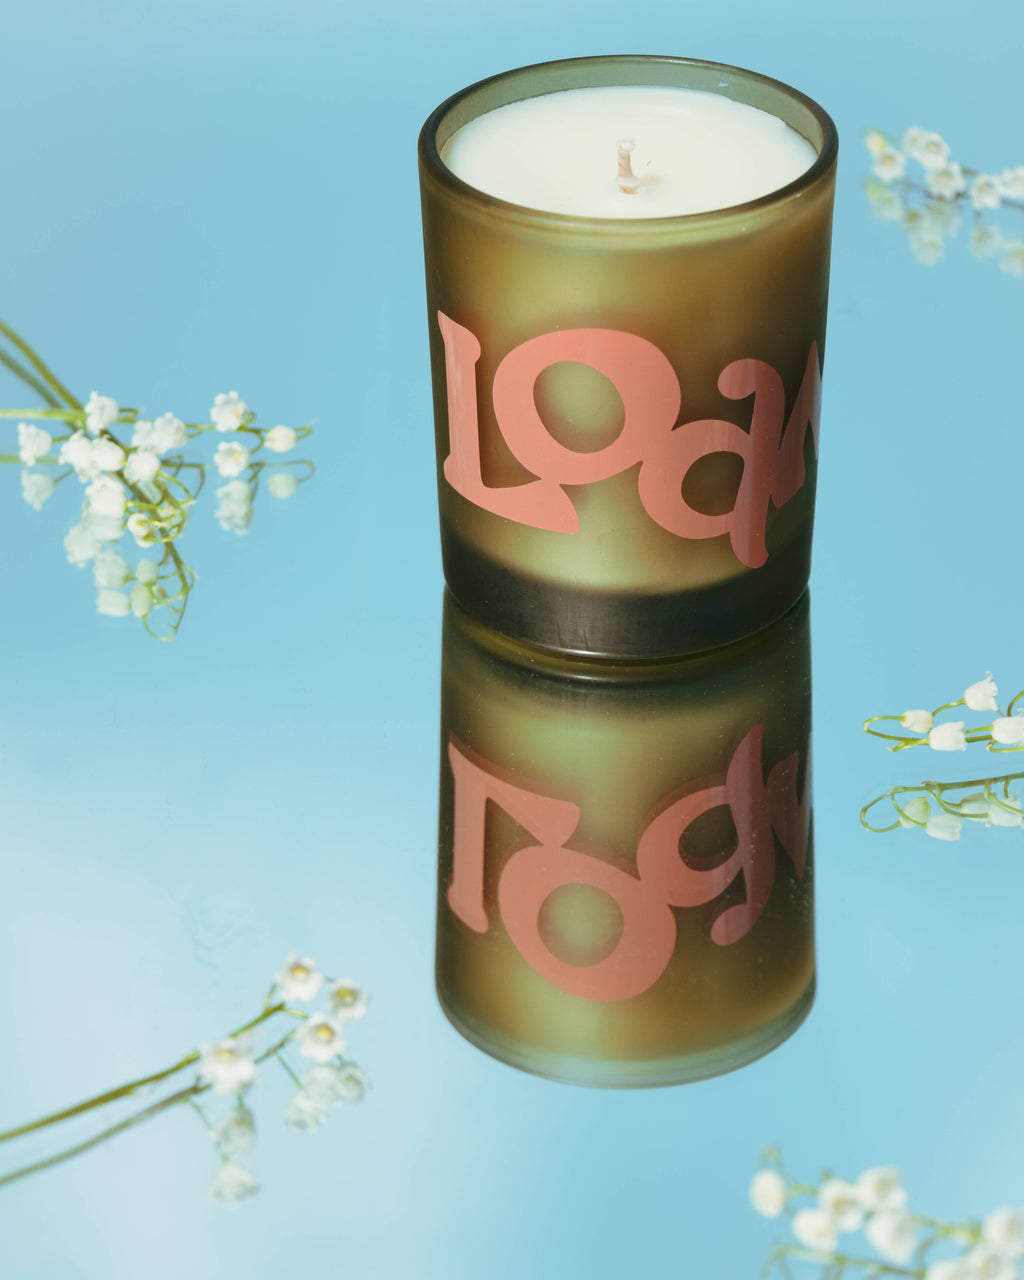 Full Bloom Candle by Loam